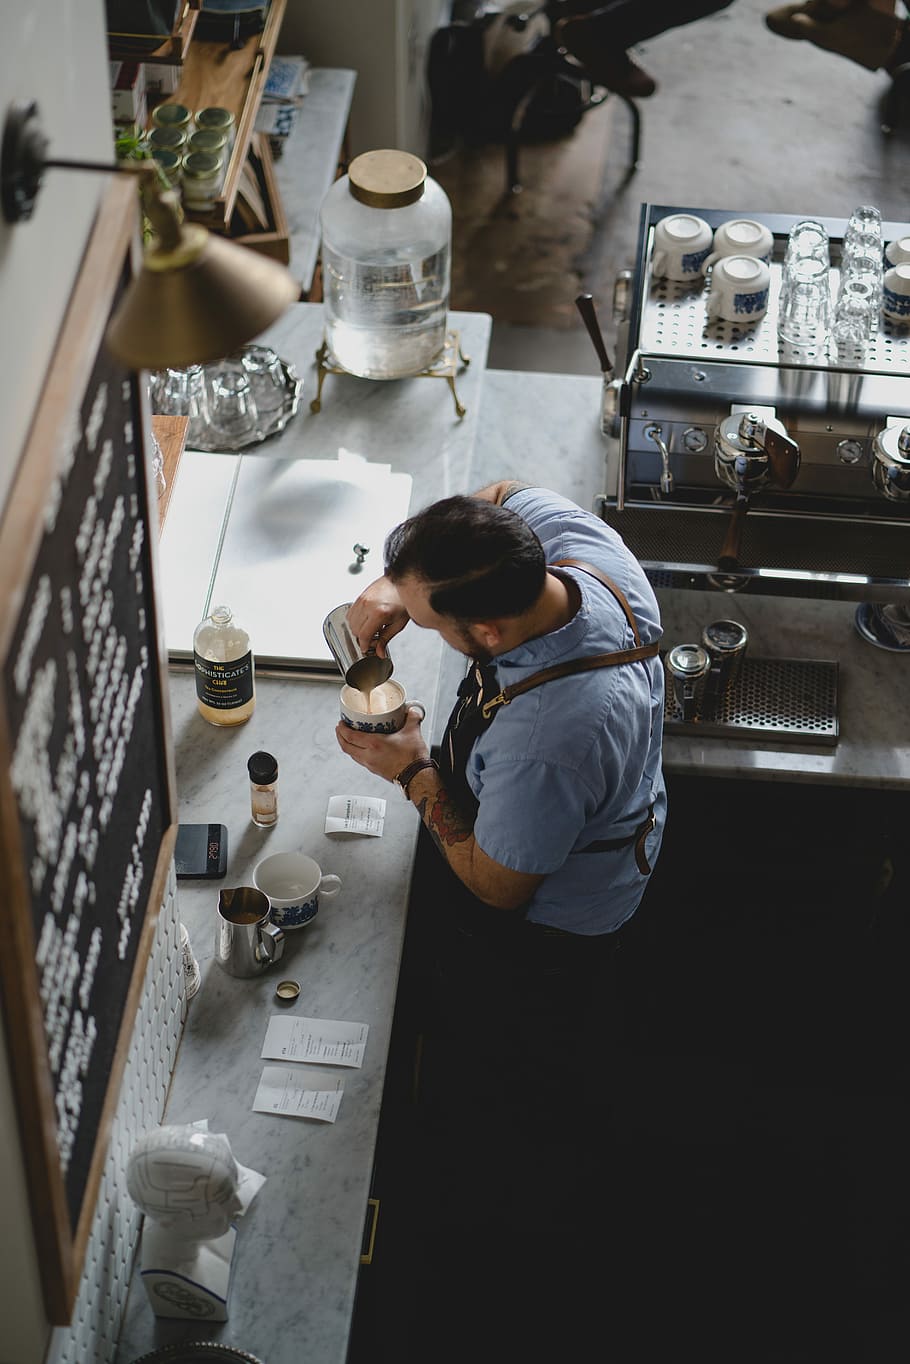 man wearing blue shirt pouring coffee in his cup, high-angle photography of male barista